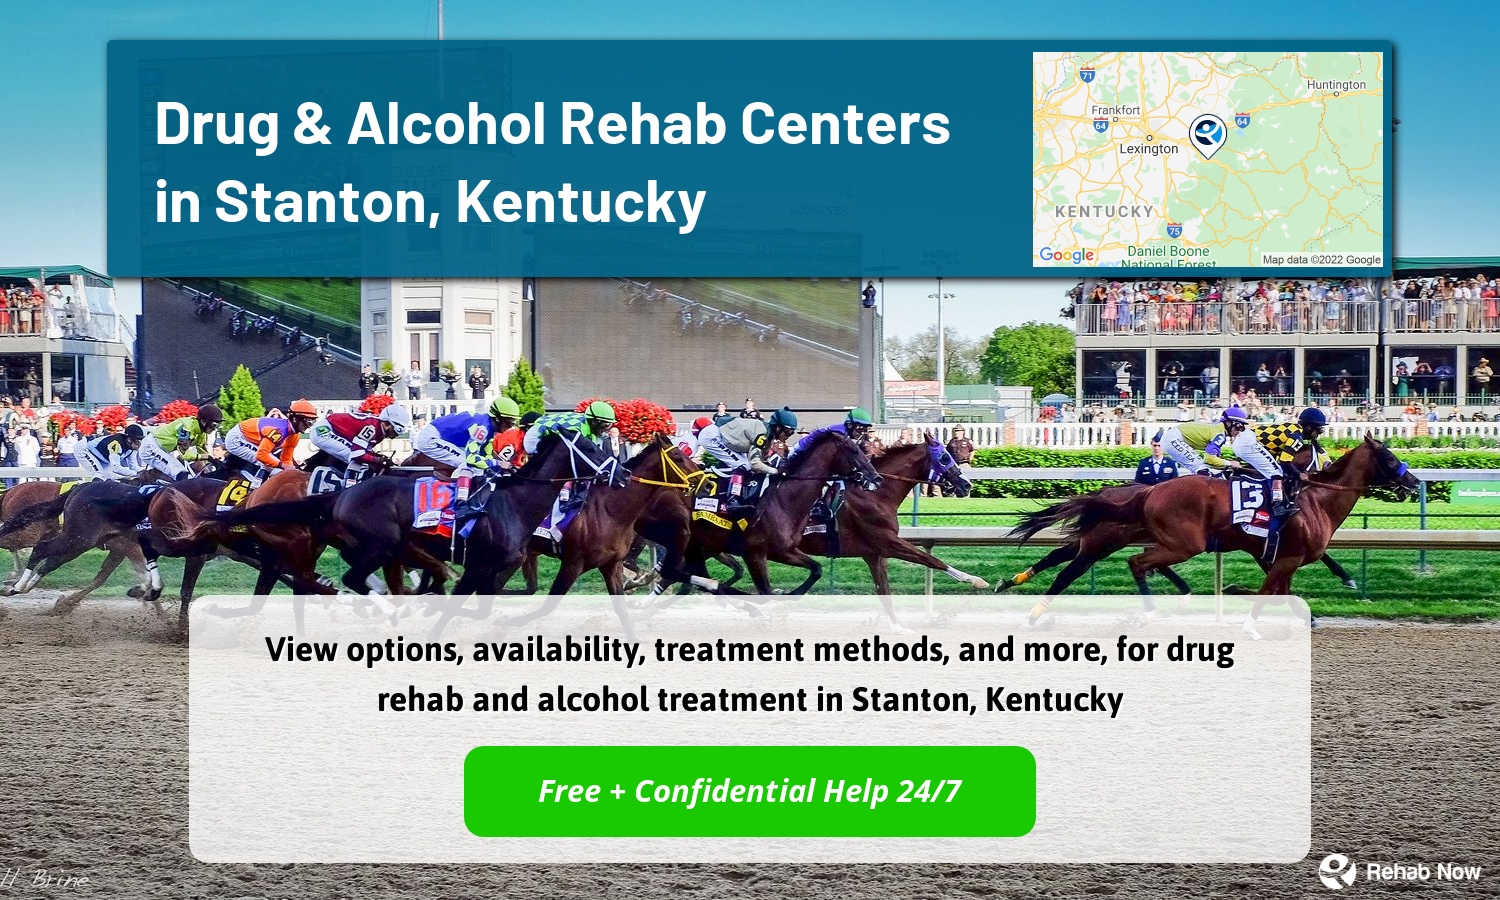 View options, availability, treatment methods, and more, for drug rehab and alcohol treatment in Stanton, Kentucky